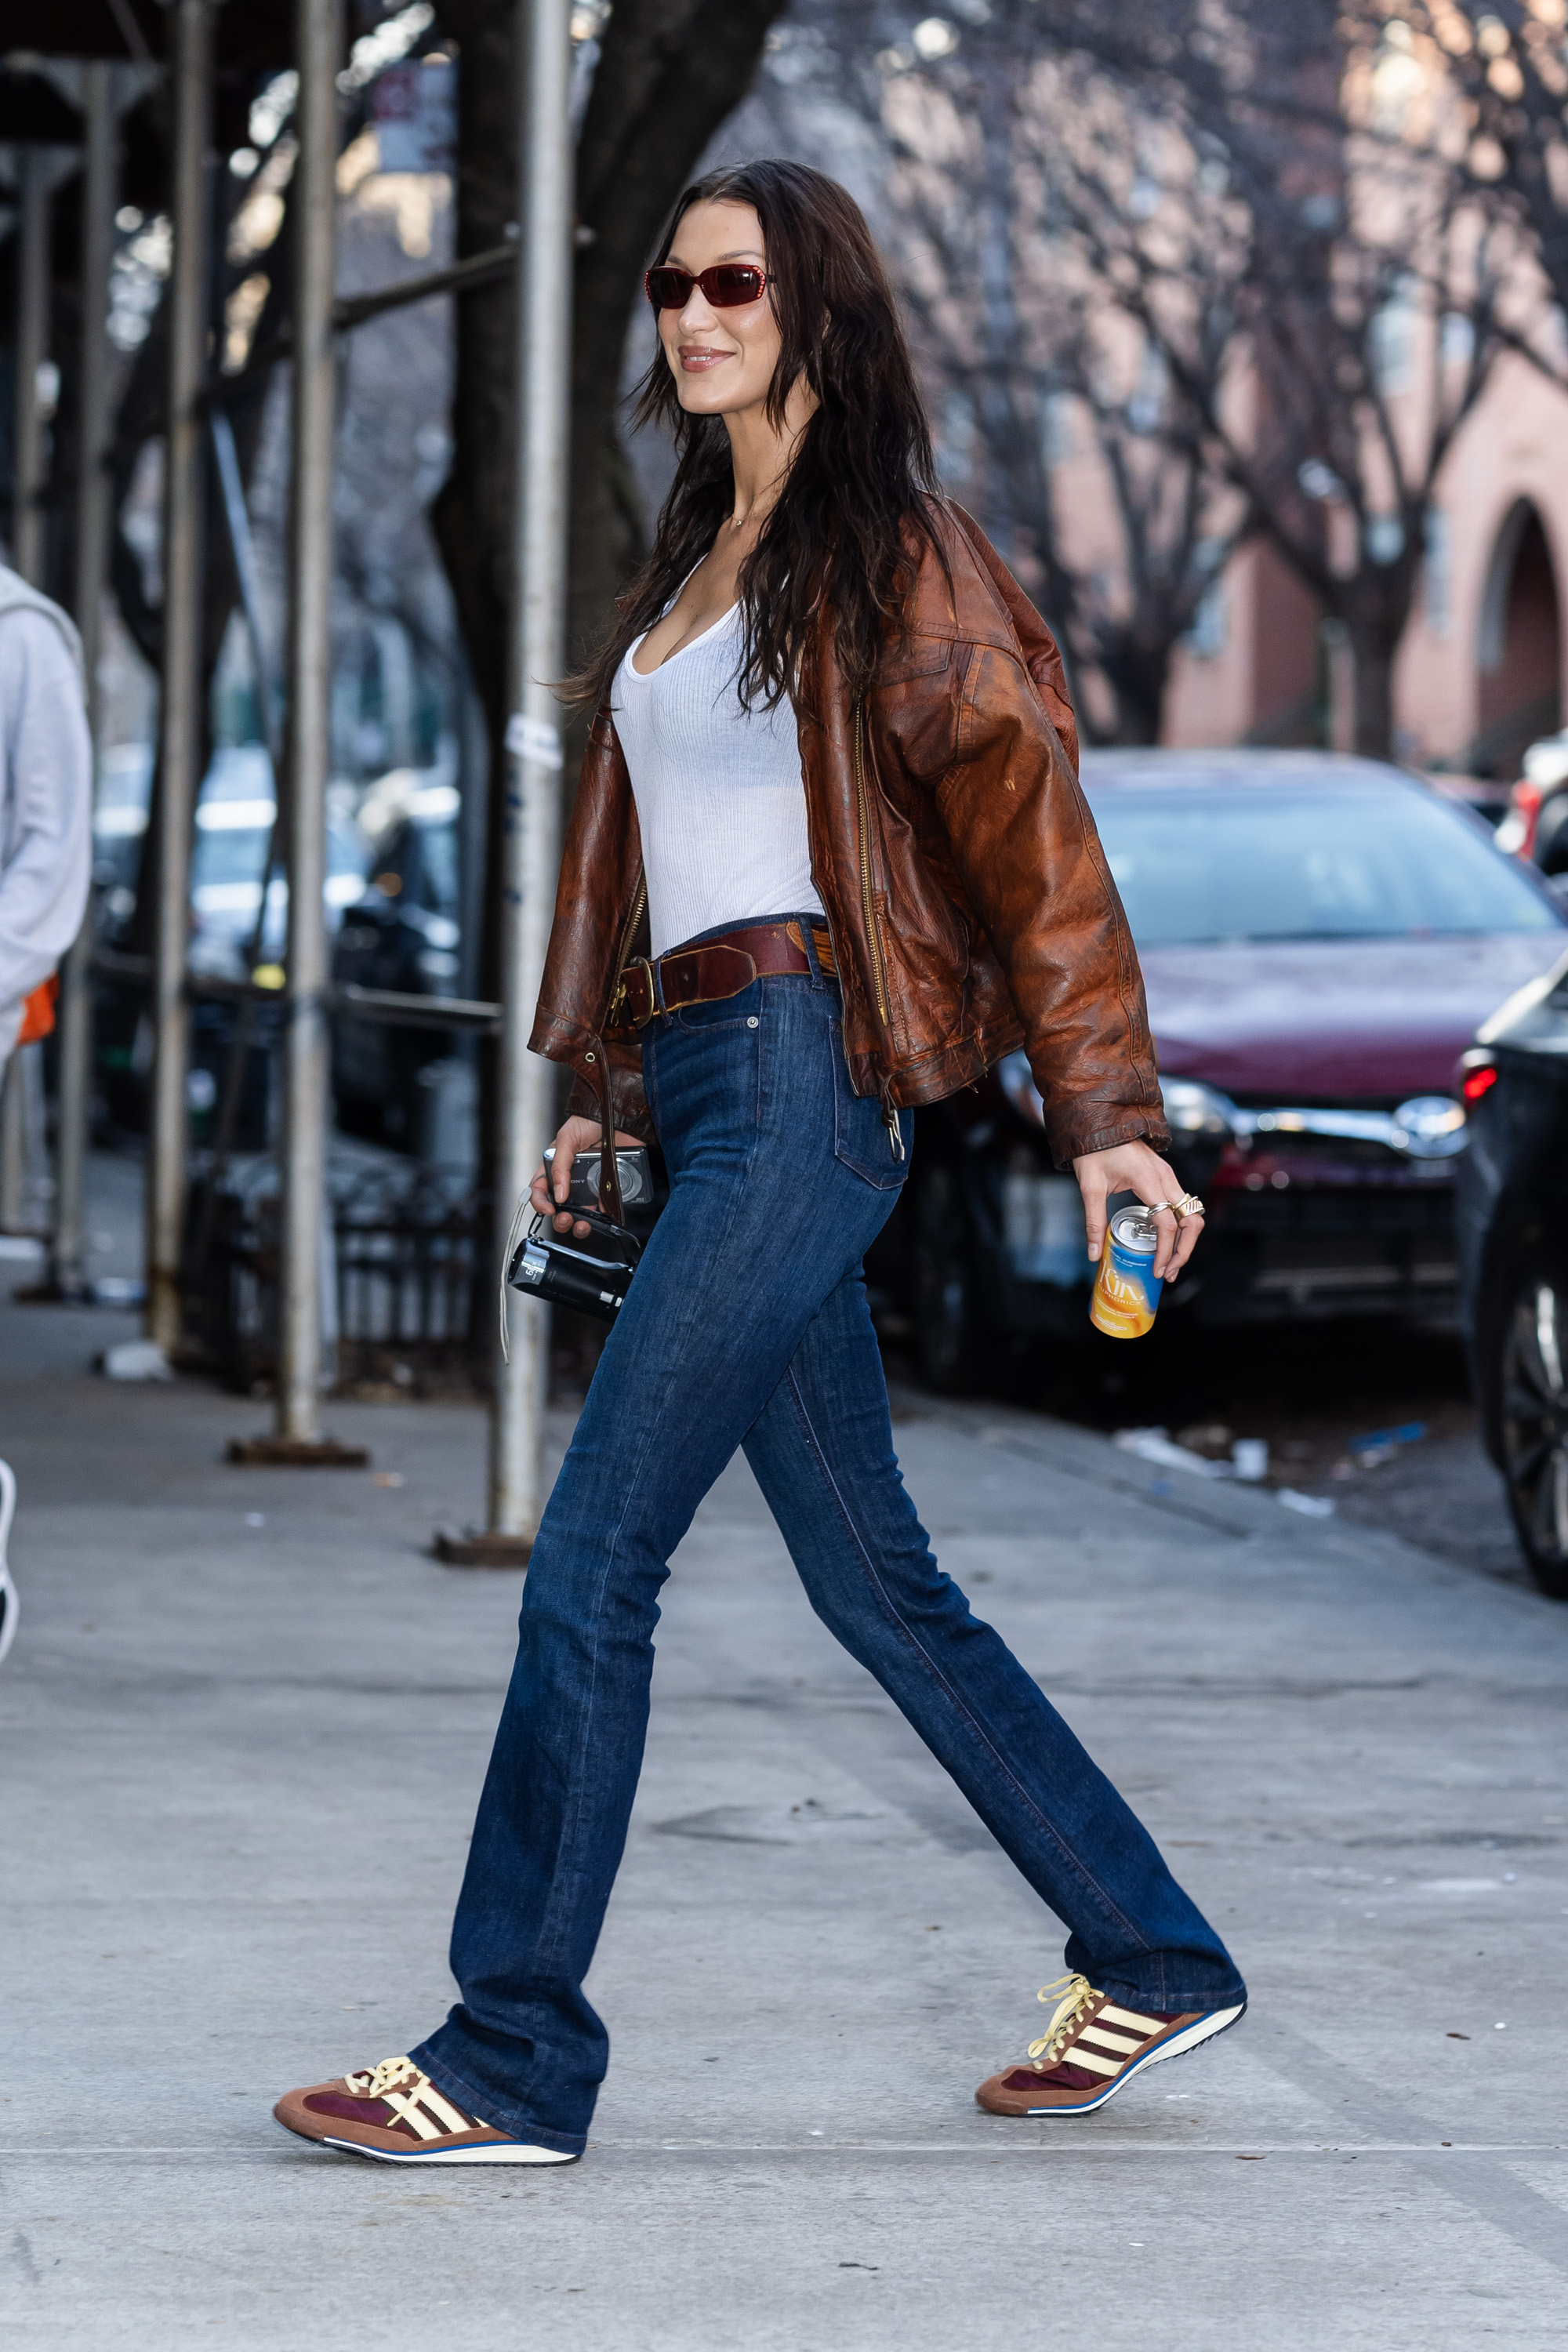 Bella Hadid wearing jeans and Adidas SL 72 sneakers in New York